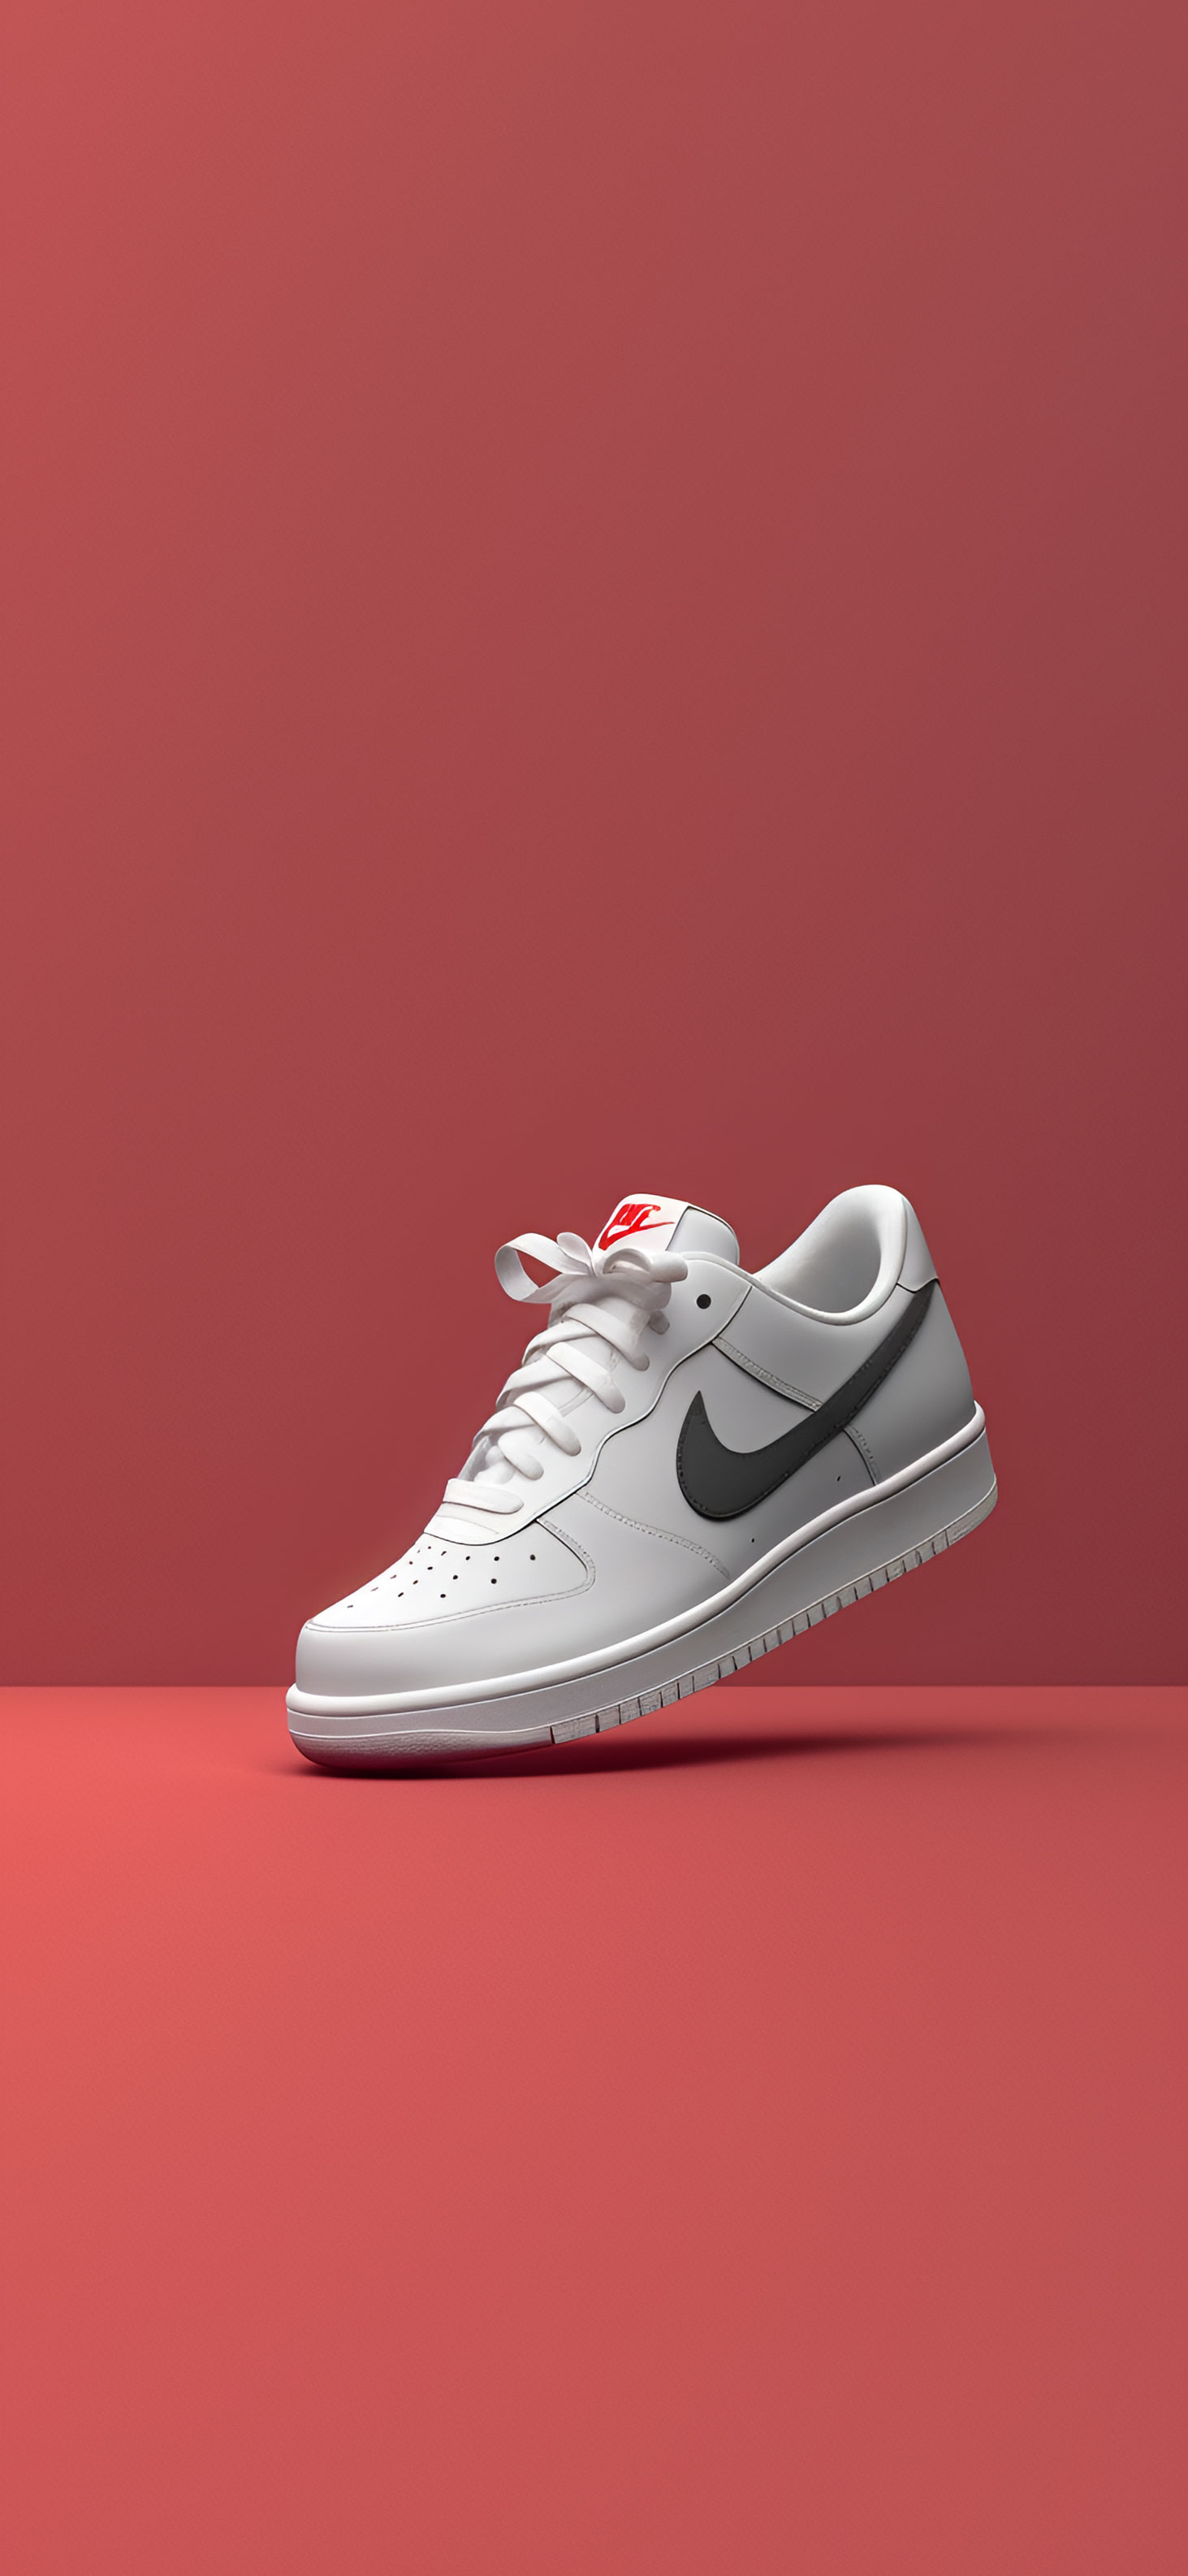 Nike Off White Wallpapers - Top Free Nike Off White Backgrounds